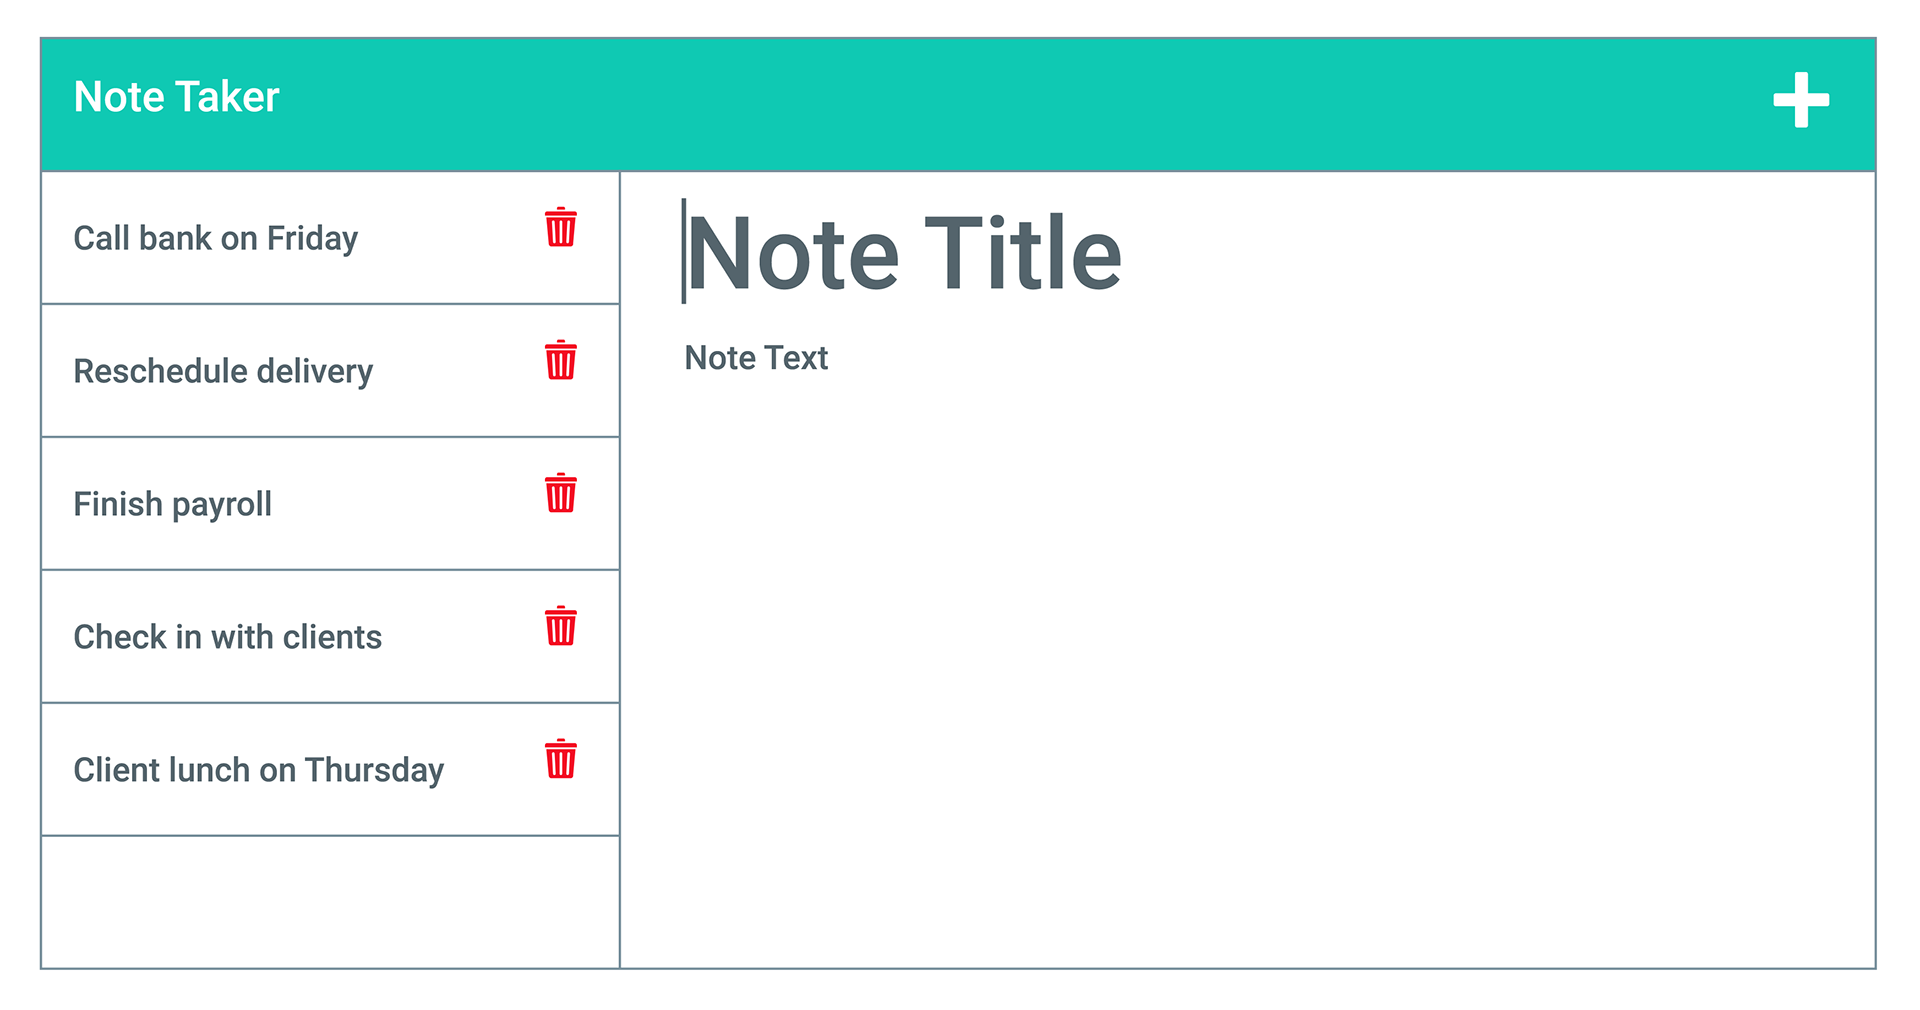 Existing notes are listed in the left-hand column with empty fields on the right-hand side for the new note’s title and text.